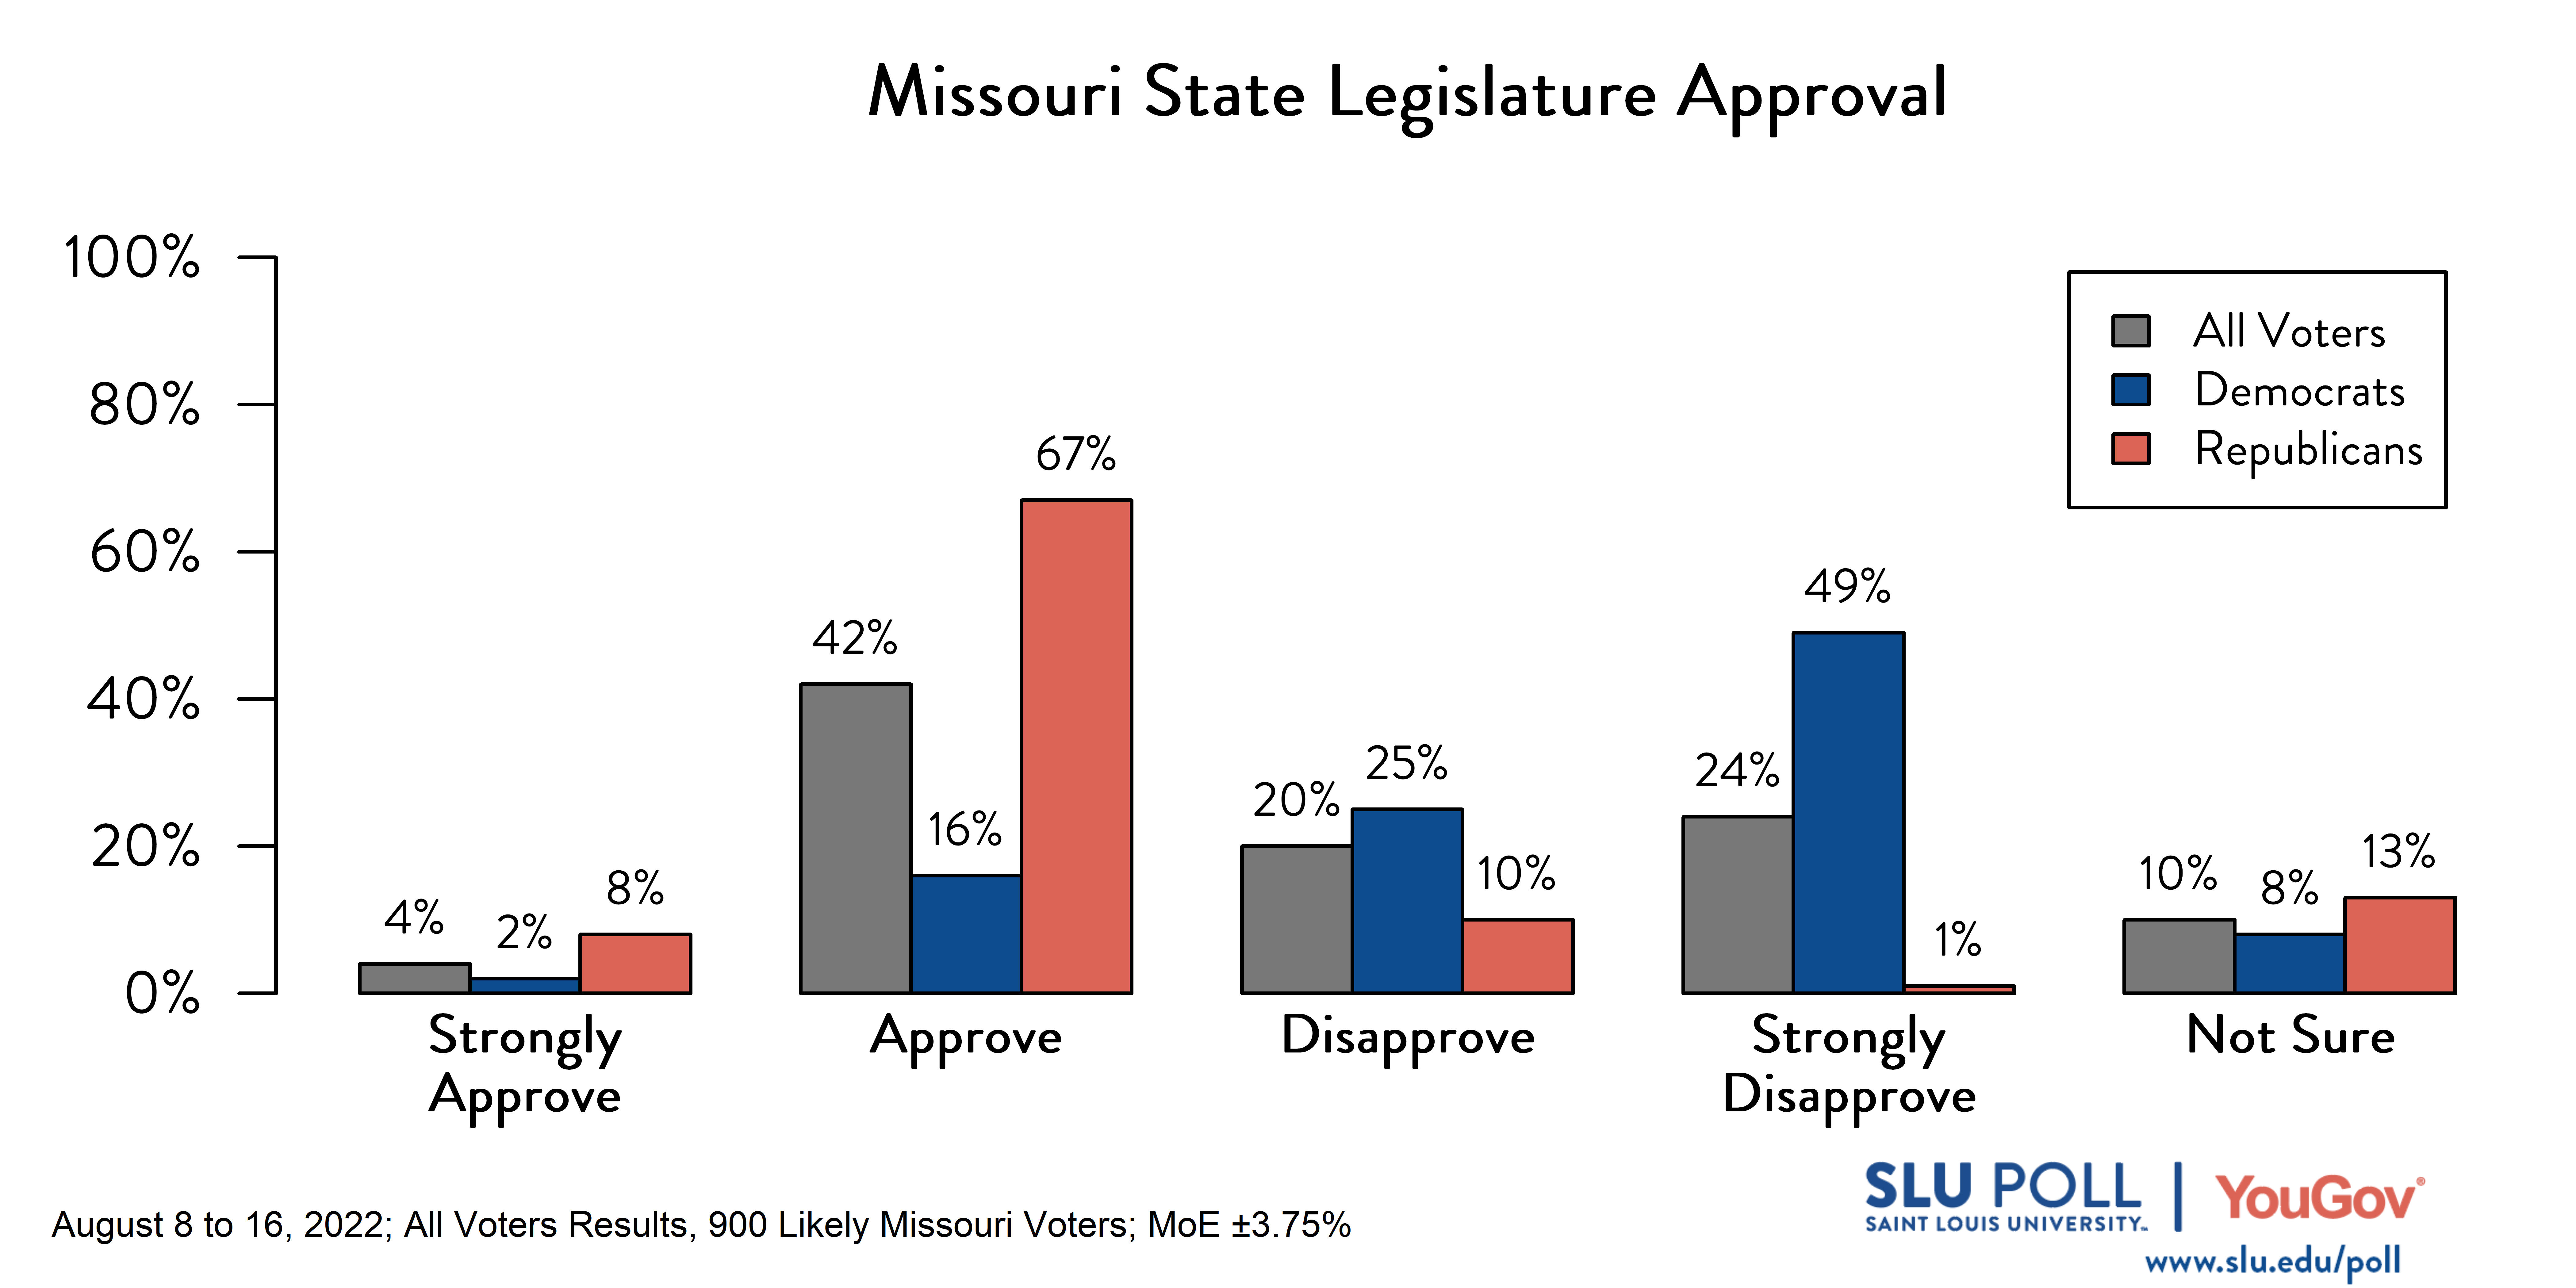 Likely voters' responses to 'Do you approve or disapprove of the way each is doing their job: The Missouri State Legislature?': 4% Strongly approve, 42% Approve, 20% Disapprove, 24% Strongly disapprove, and 10% Not sure. Democratic voters' responses: ' 2% Strongly approve, 16% Approve, 25% Disapprove, 49% Strongly disapprove, and 8% Not sure. Republican voters' responses: 8% Strongly approve, 67% Approve, 10% Disapprove, 1% Strongly disapprove, and 13% Not sure. 